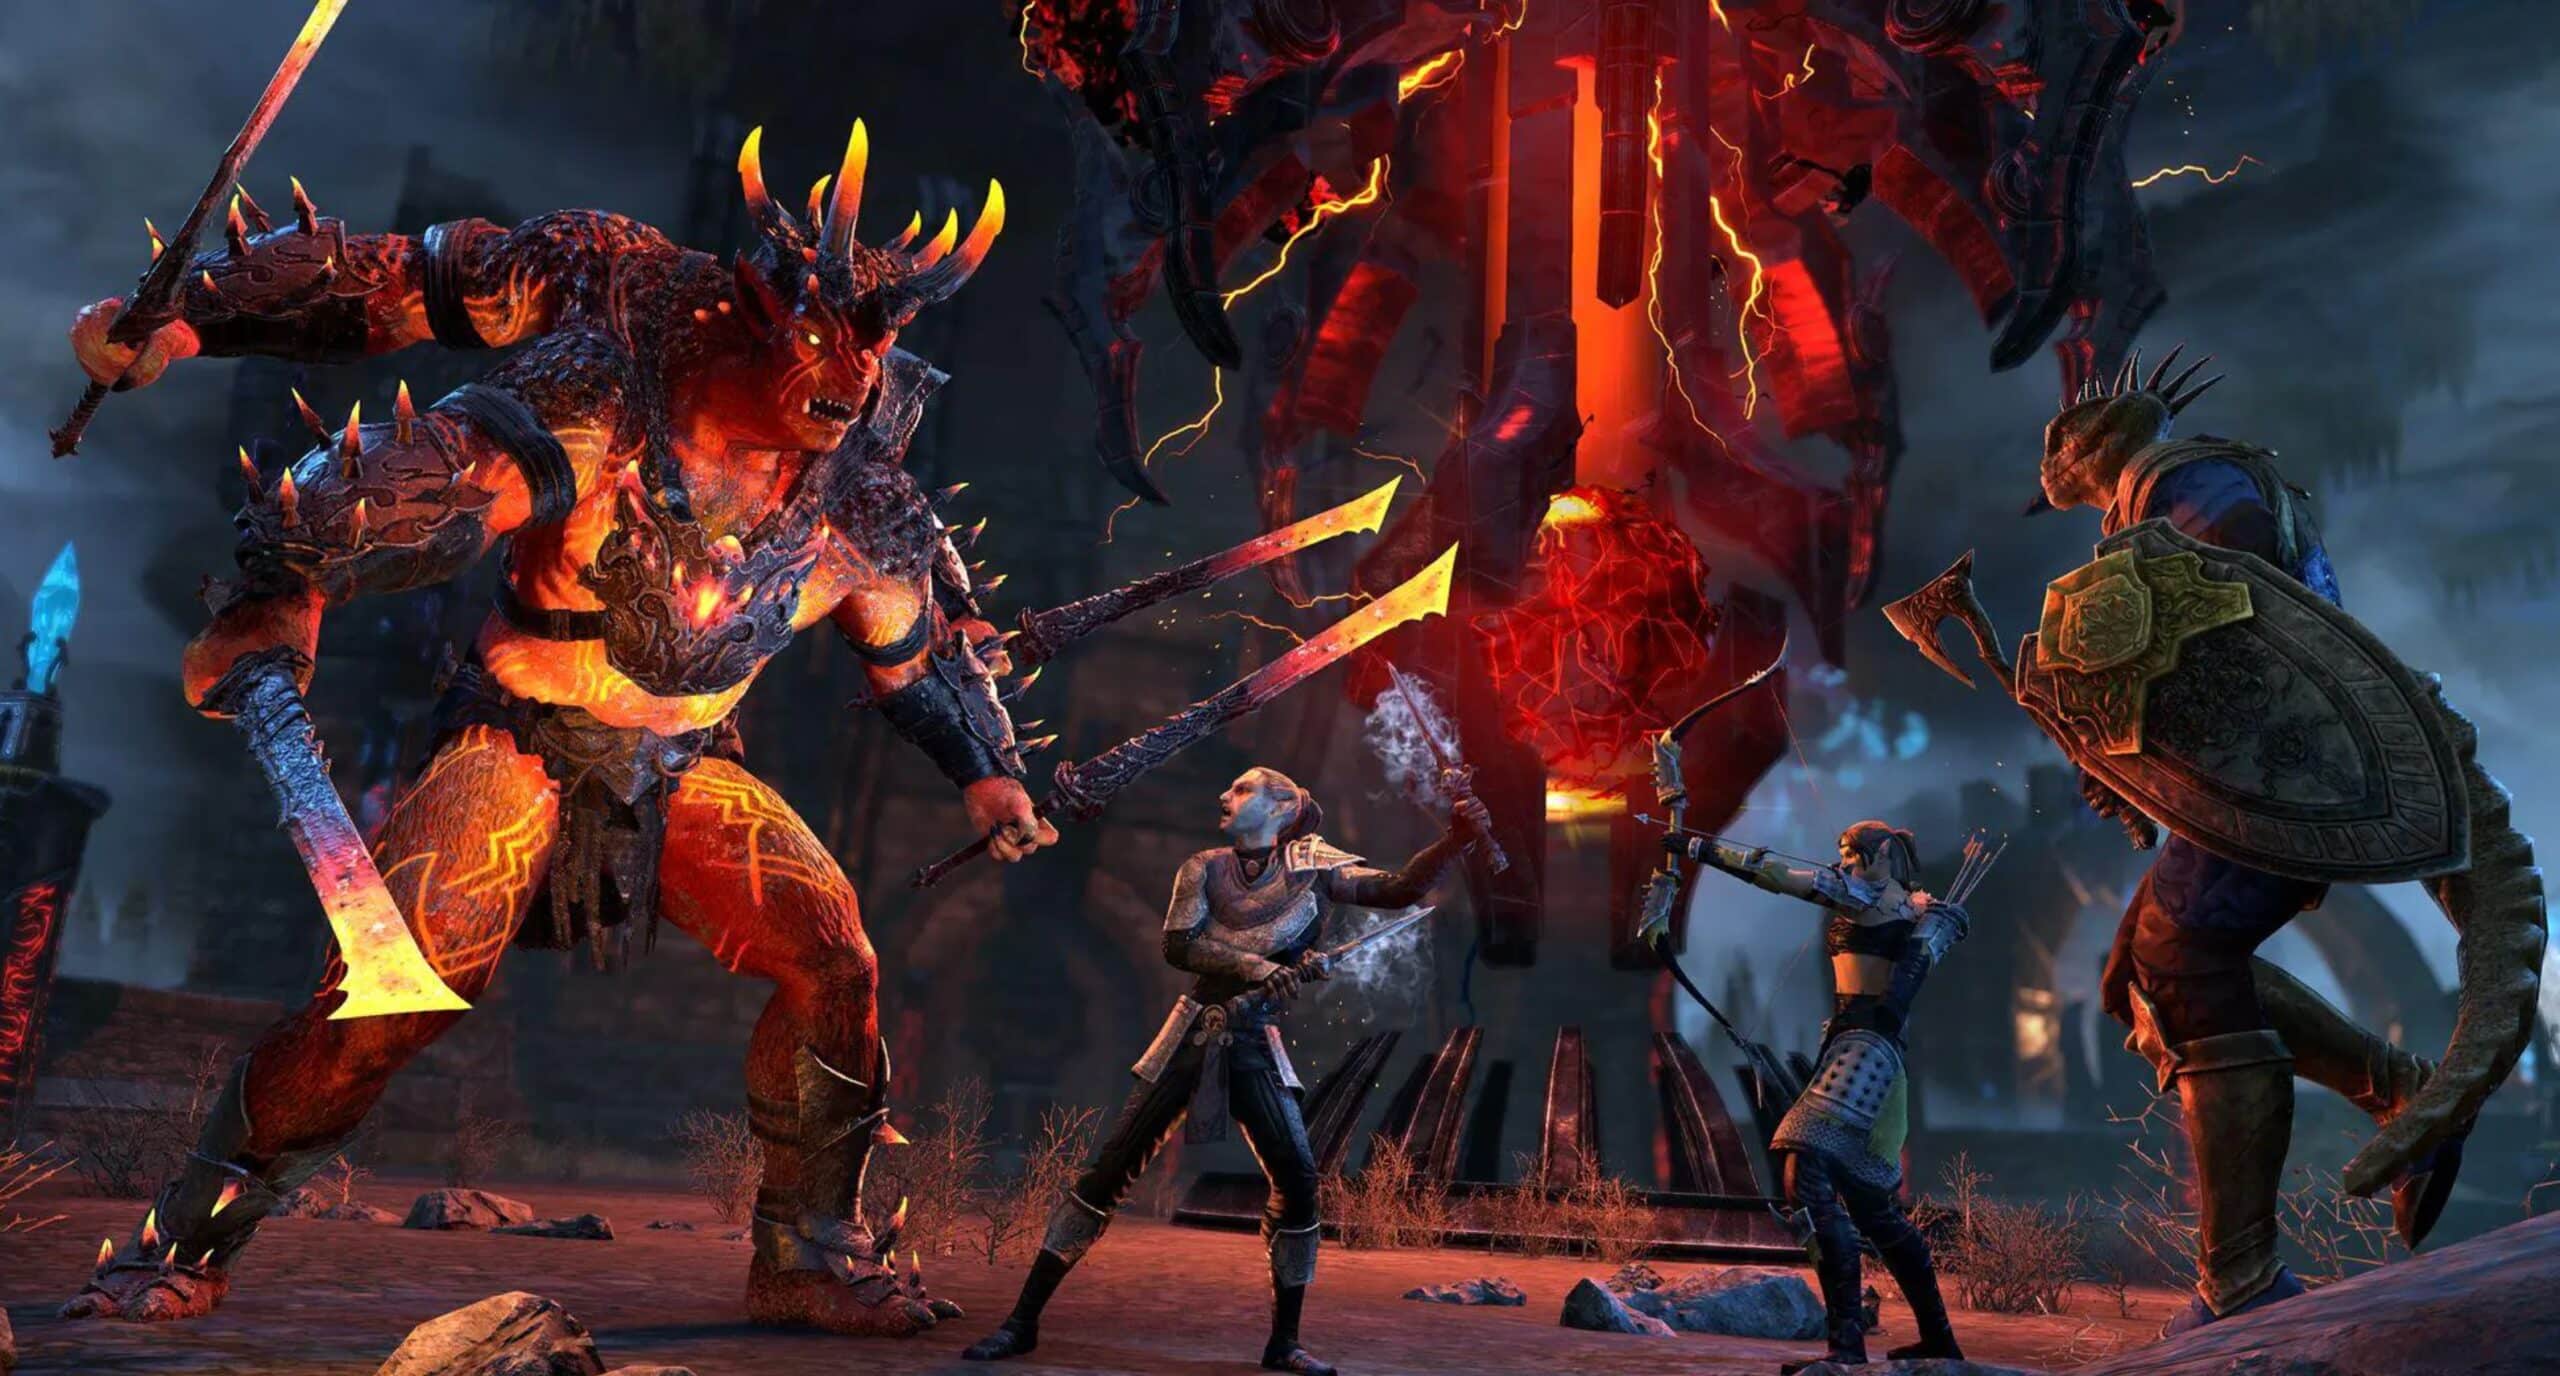 The Elder Scrolls Online Waking Flame DLC is now available for PC and Mac